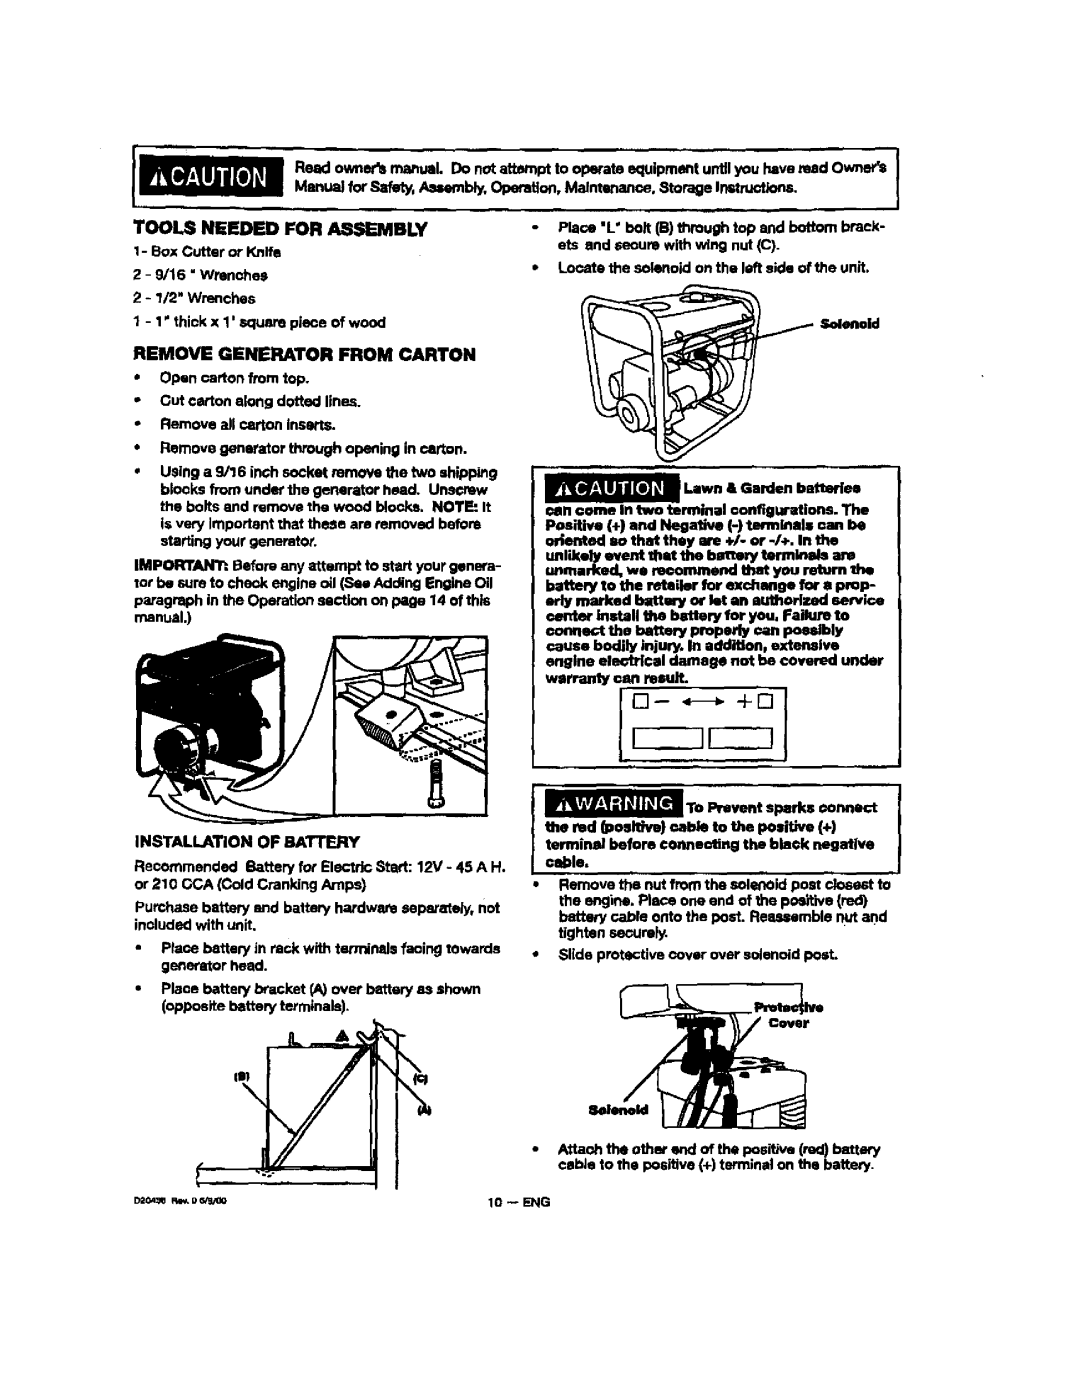 Sears 150, 919, 329 owner manual I--- +r, Tools, Needed For Assembly, Remove Generator From Carton 